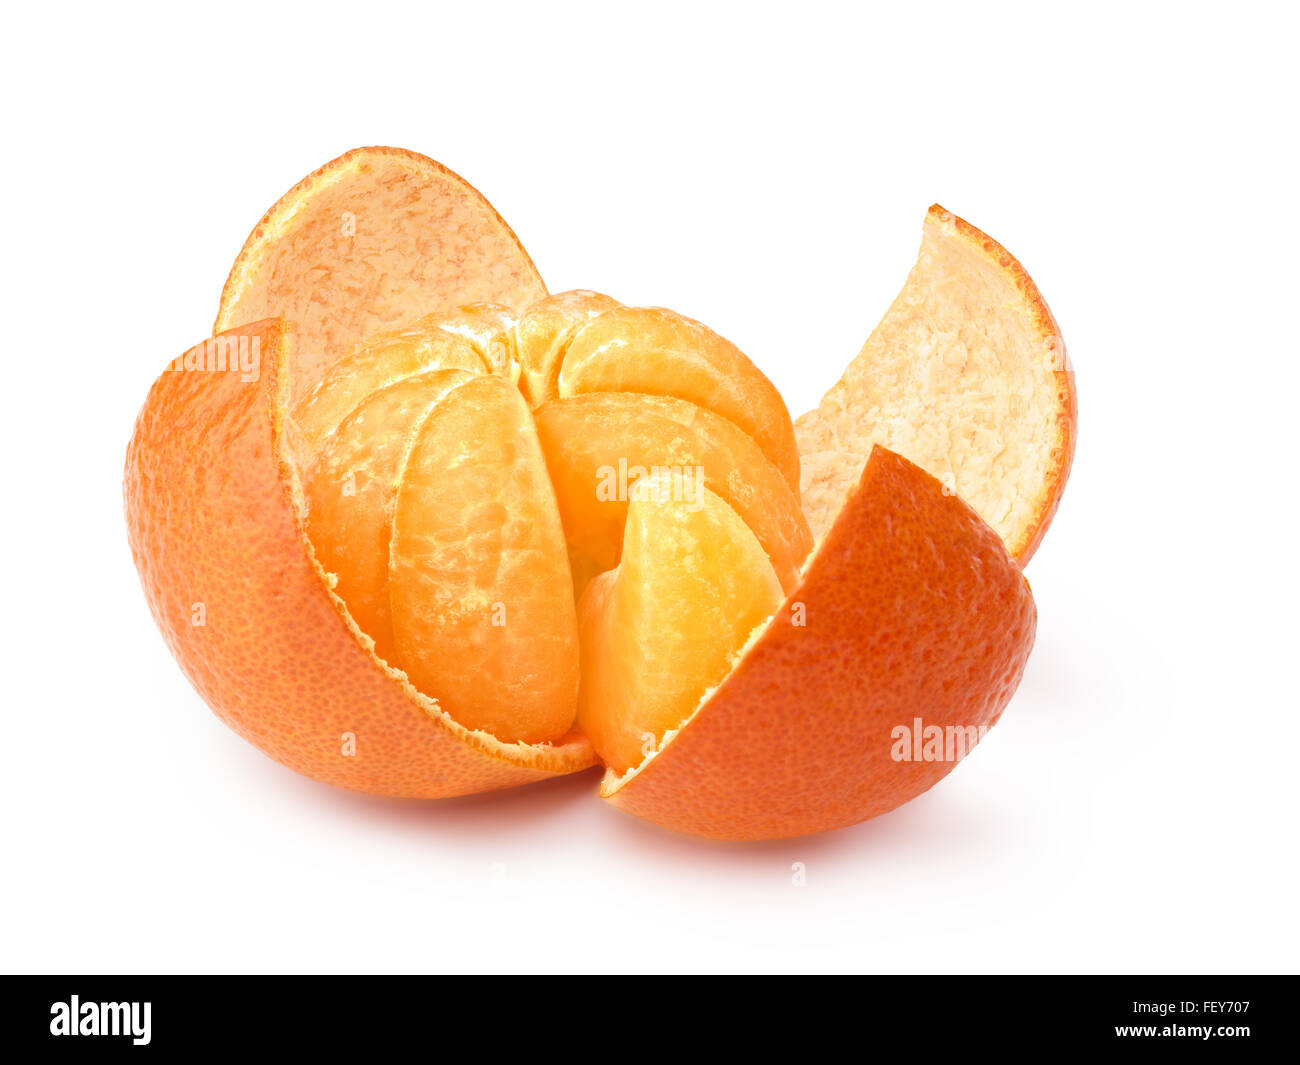 Fresh Ripe Whole And Sliced Mandarin Tangerine Or Clementine Stock Photo -  Download Image Now - iStock